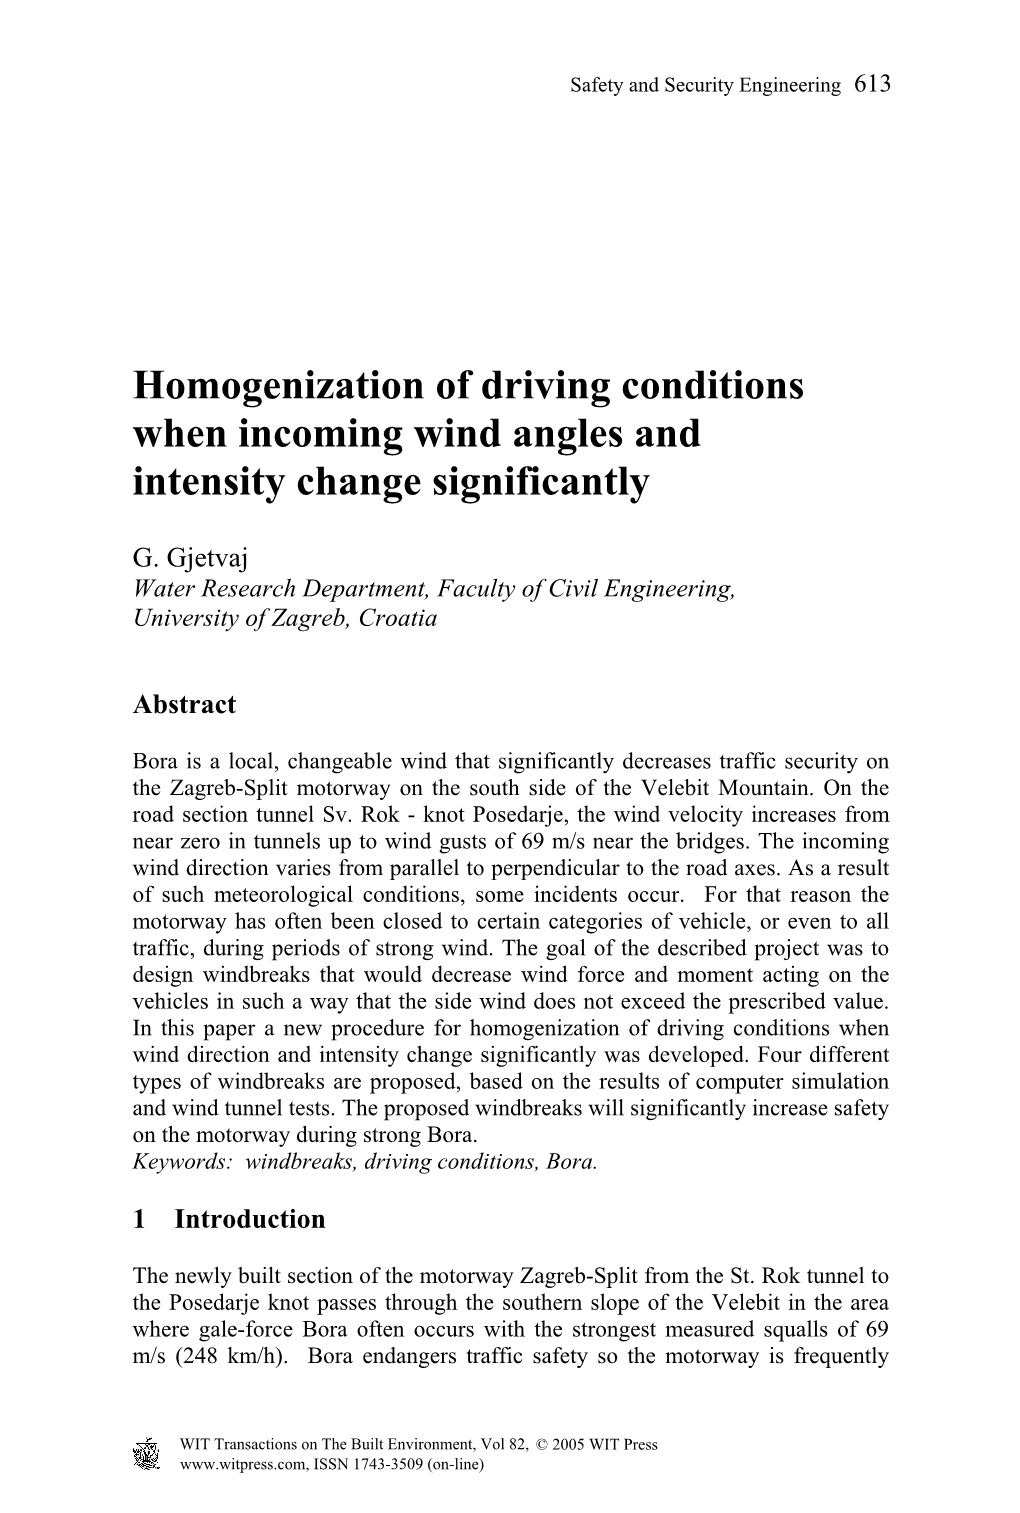 Homogenization of Driving Conditions When Incoming Wind Angles and Intensity Change Significantly